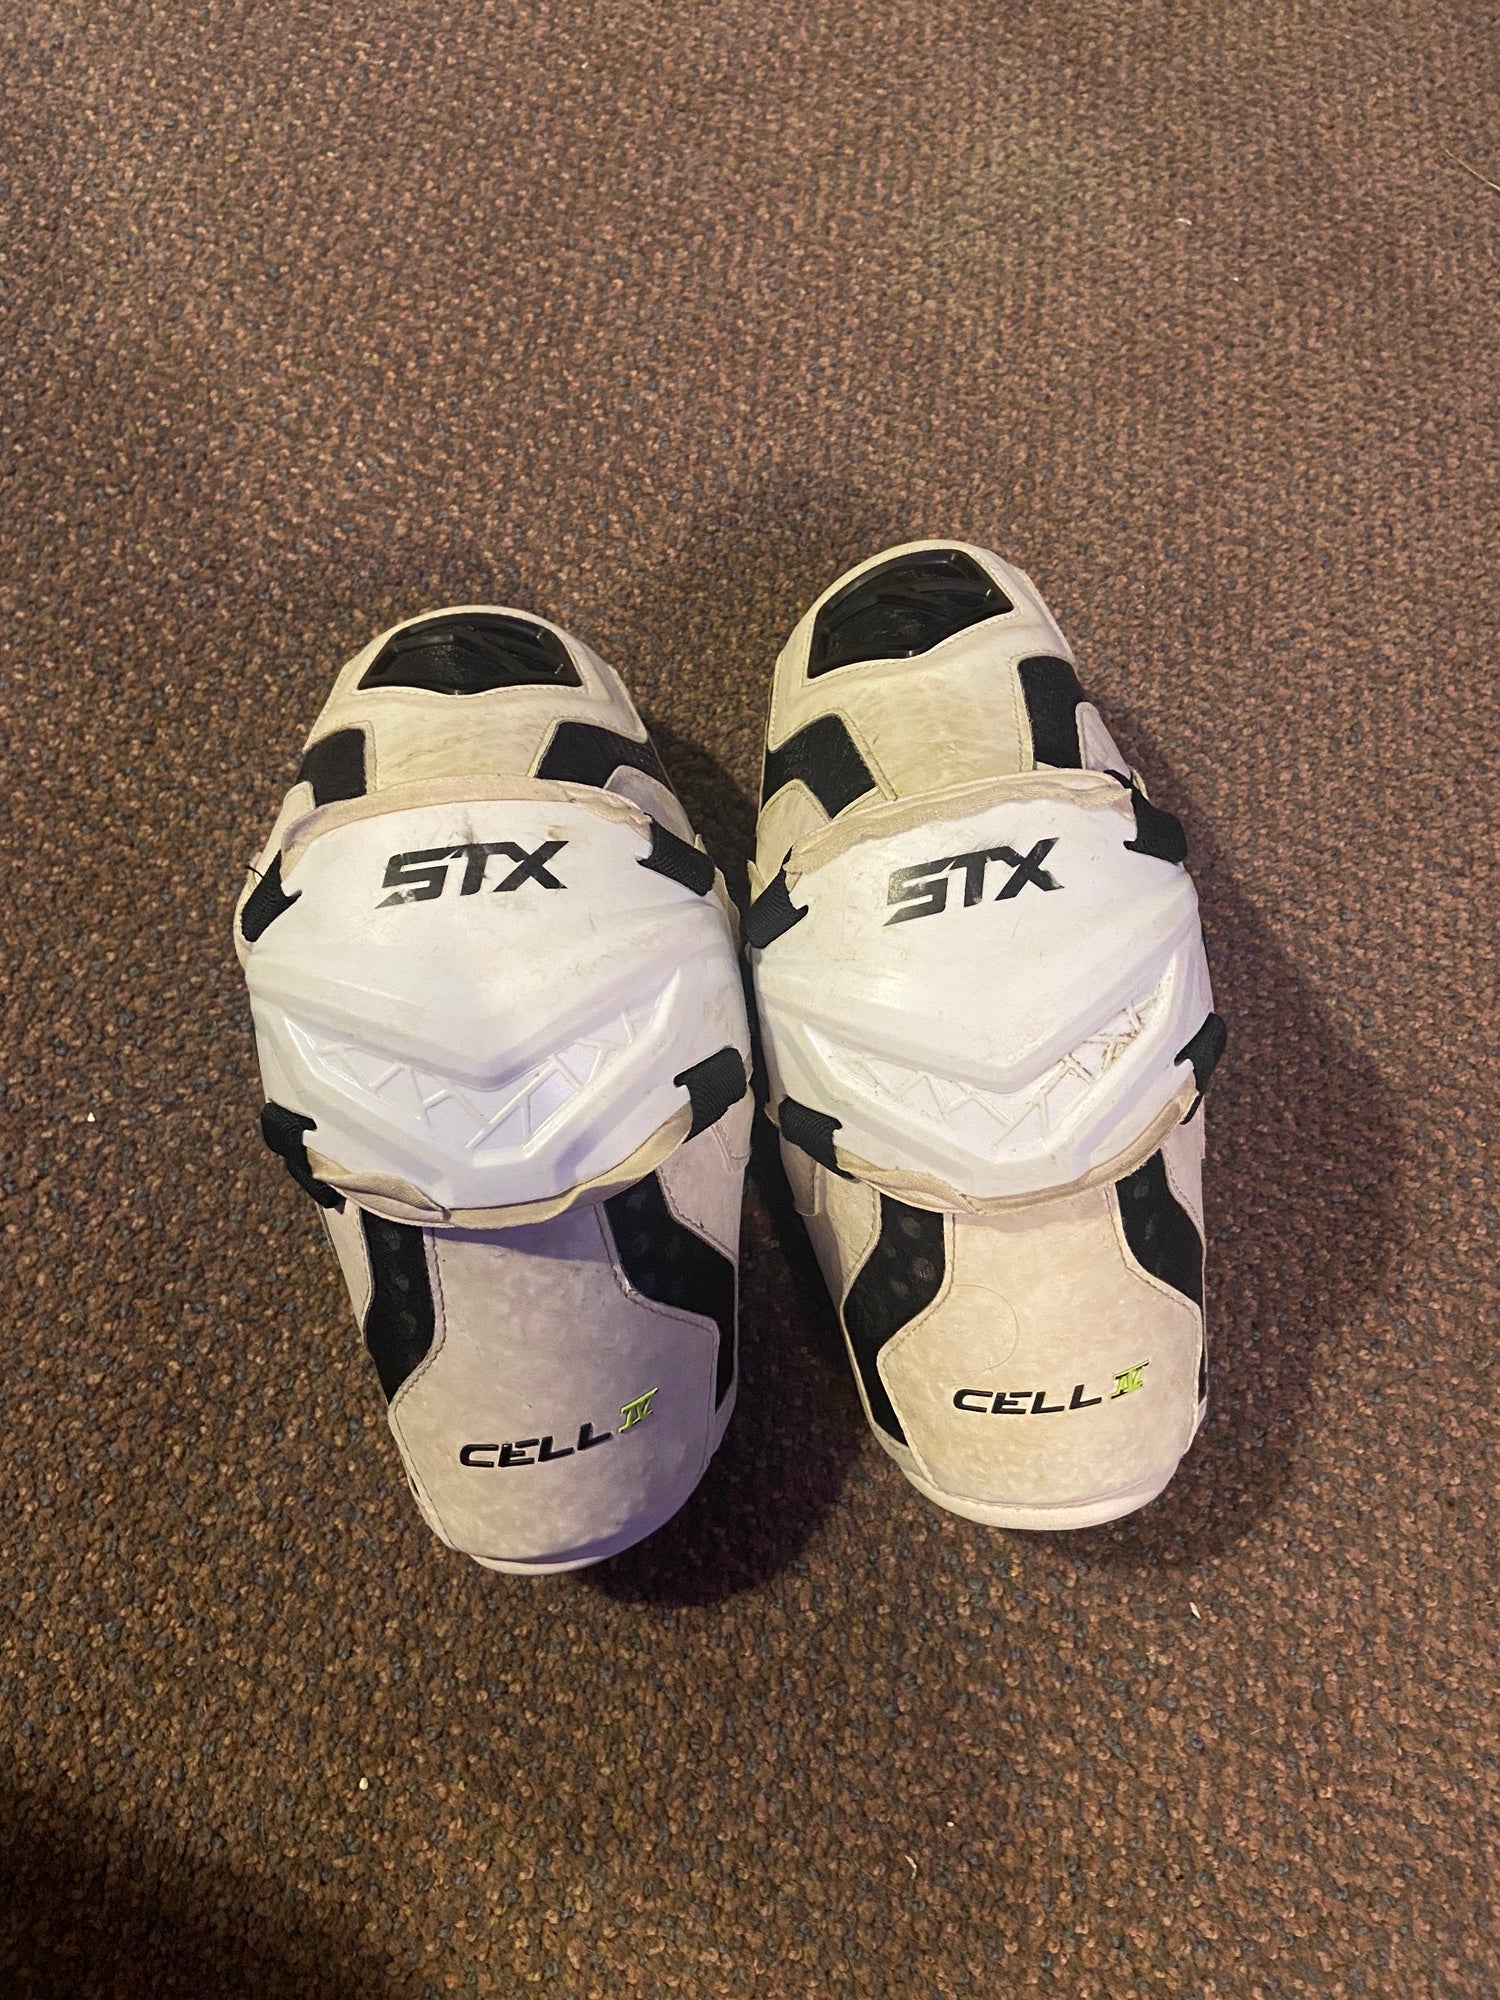 STX Cell 4 Elbow Pads